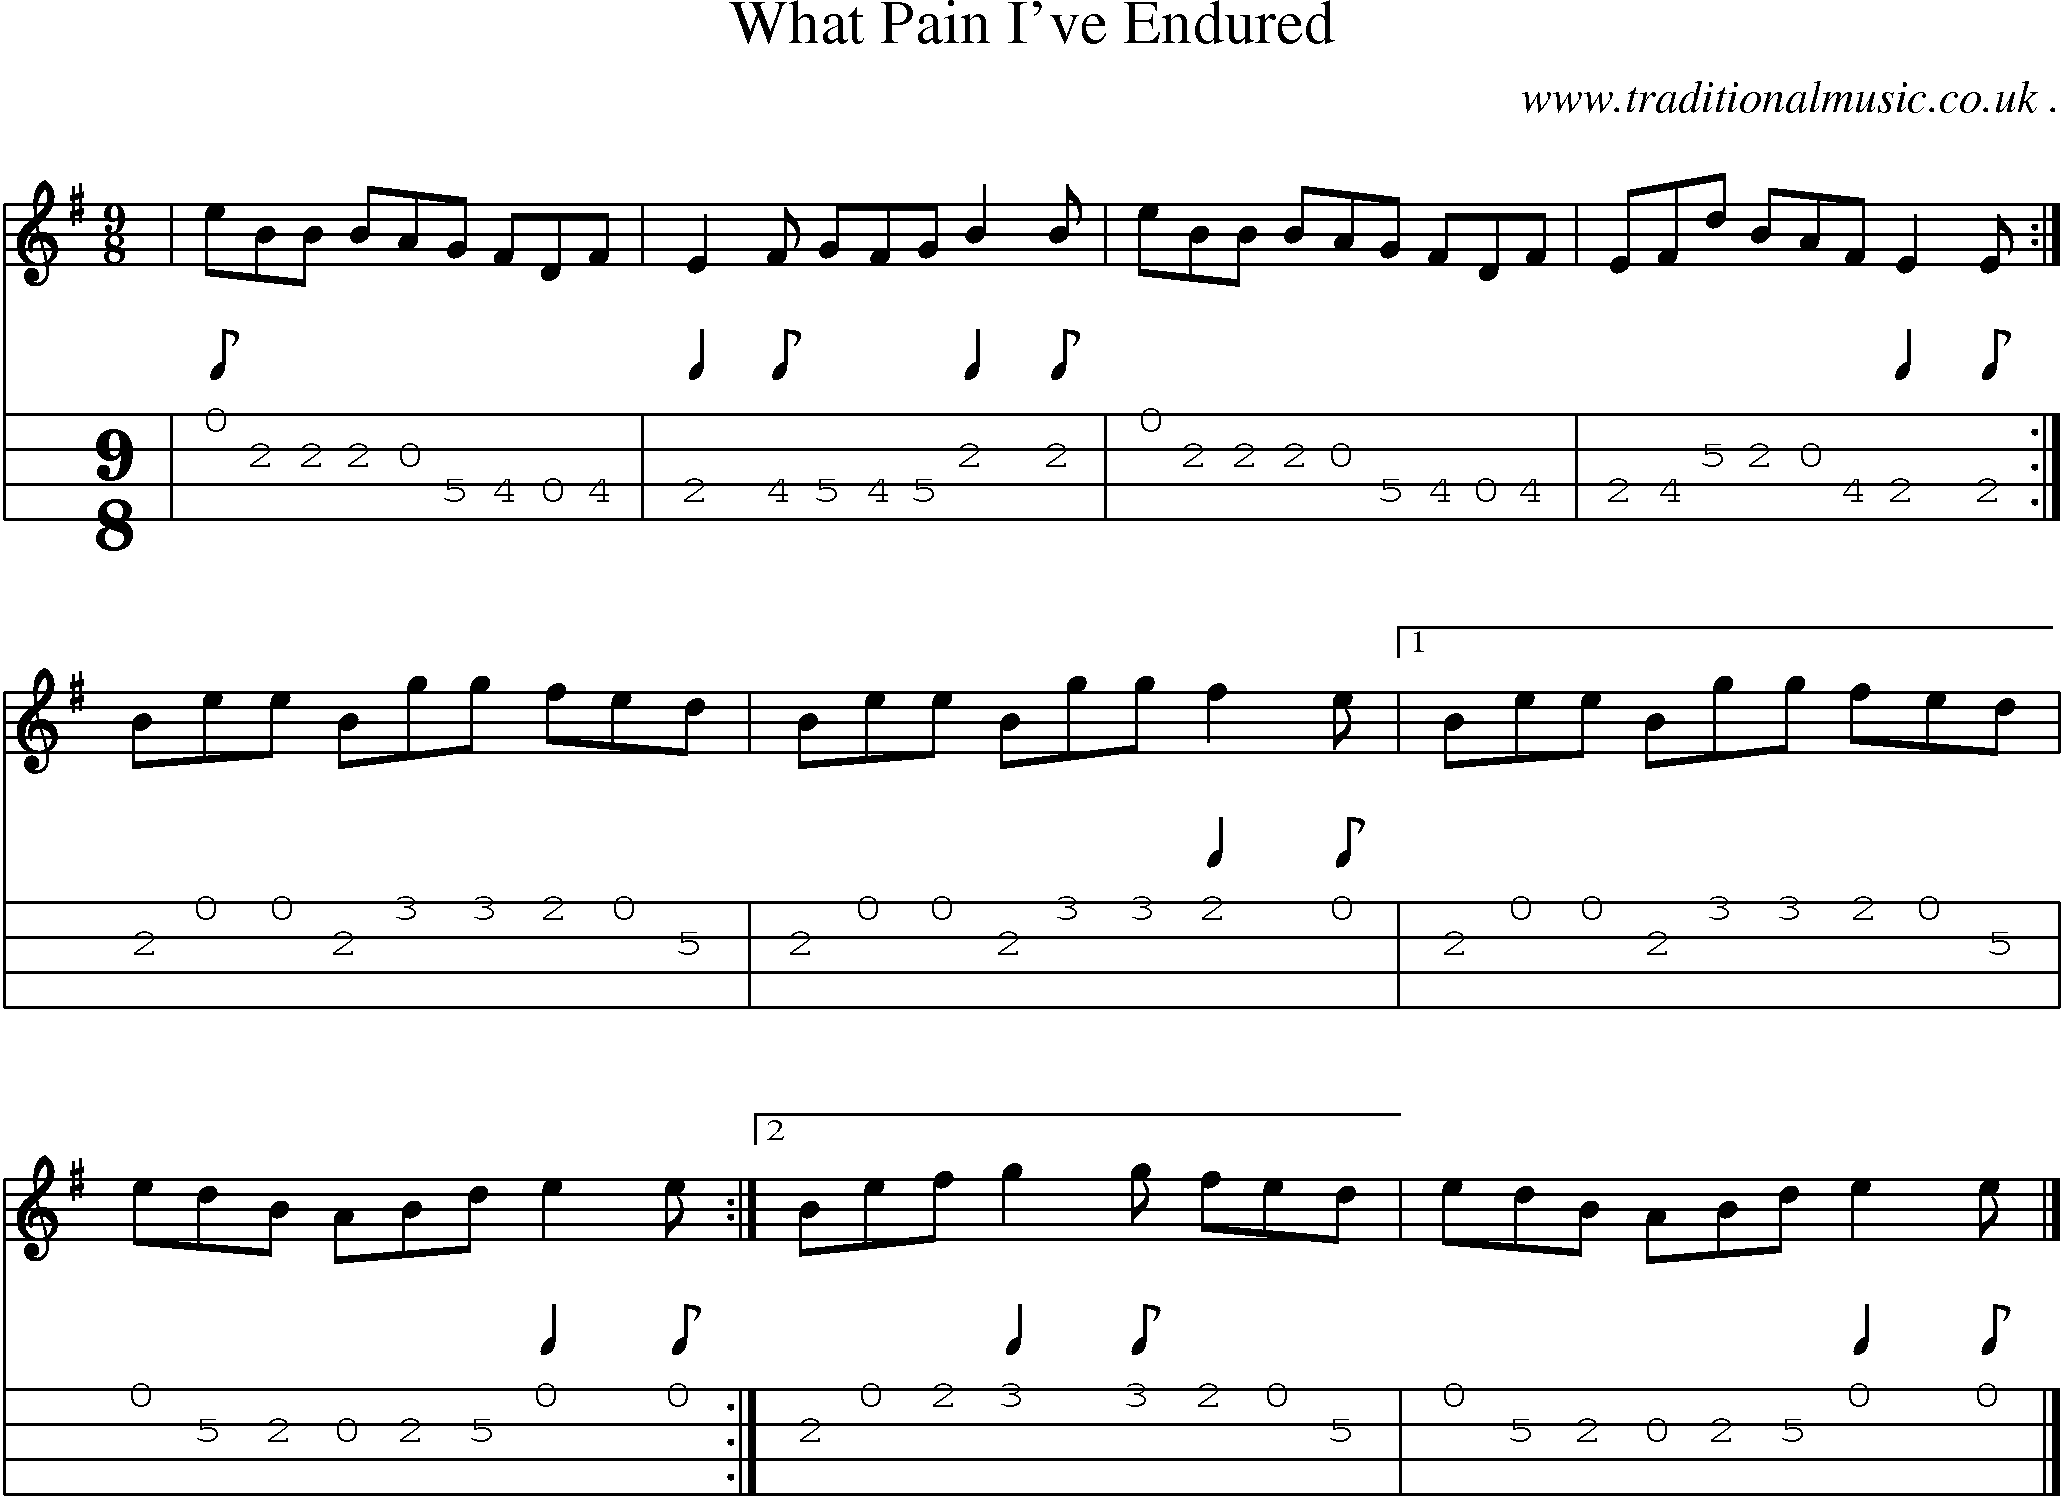 Sheet-music  score, Chords and Mandolin Tabs for What Pain Ive Endured